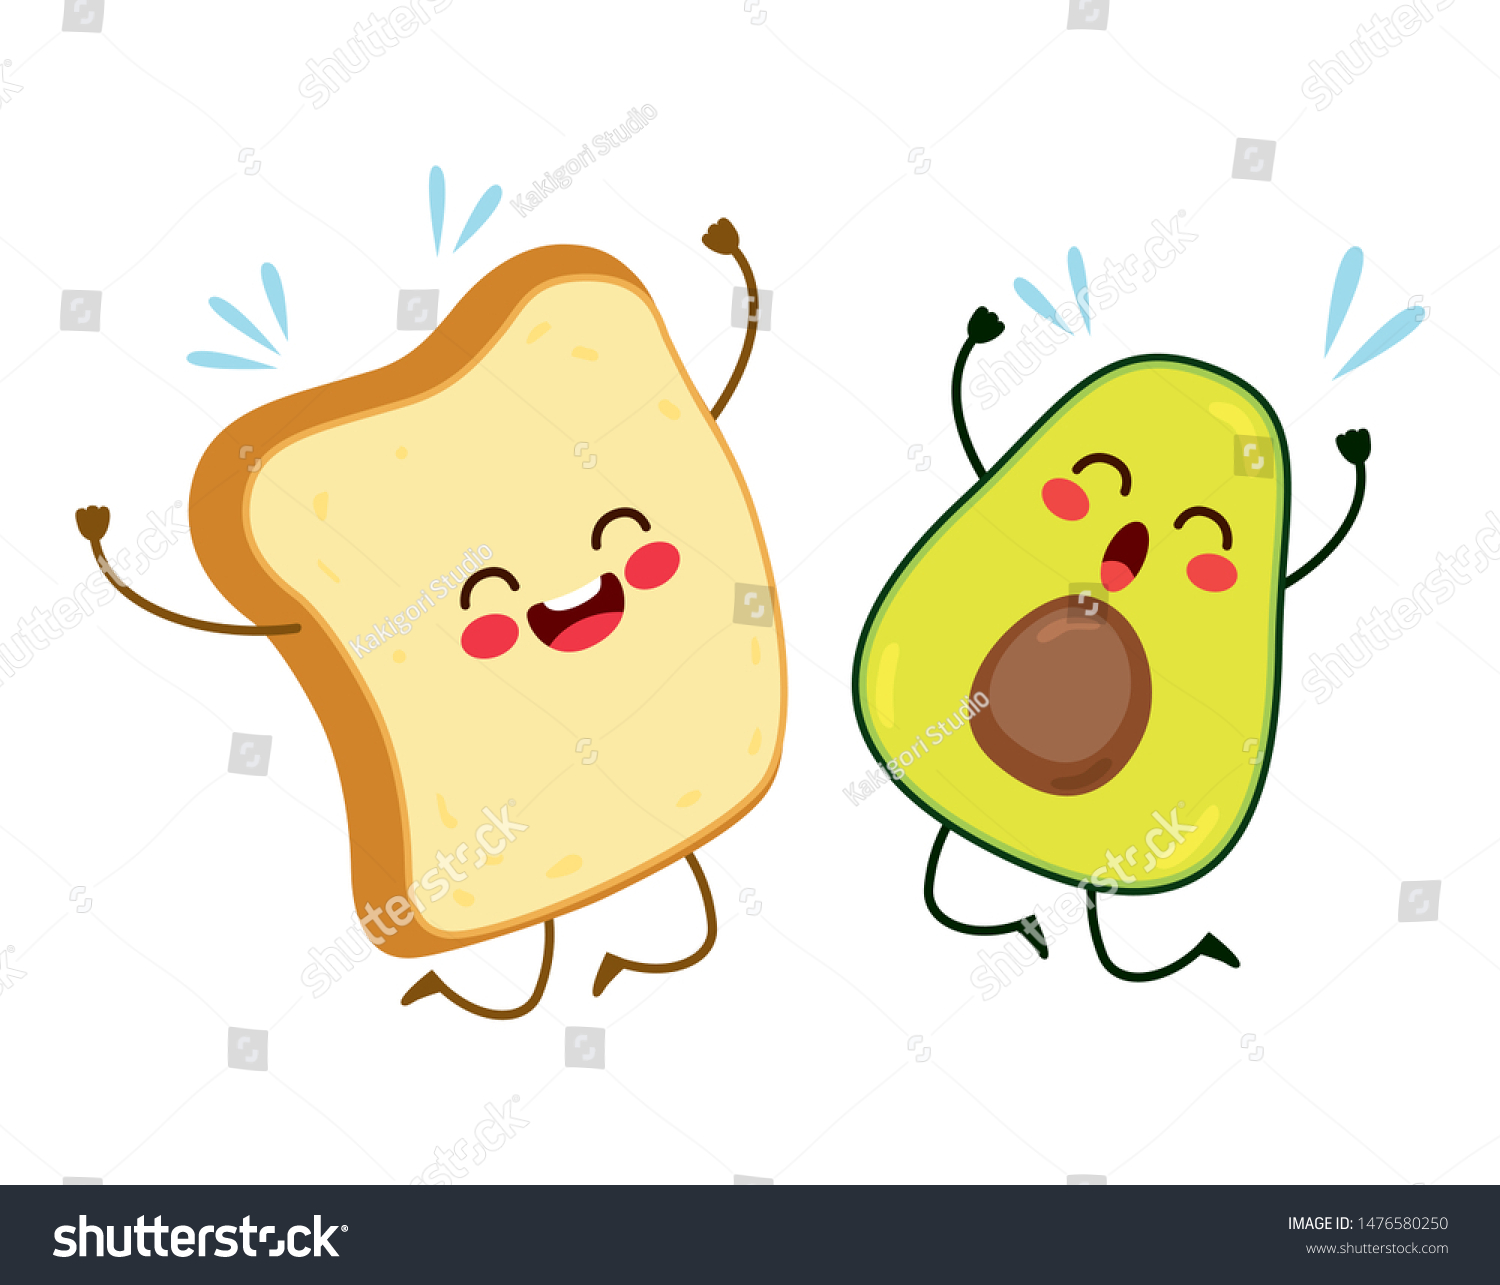 SVG of Cute best friends toast and avocado characters jumping happy svg